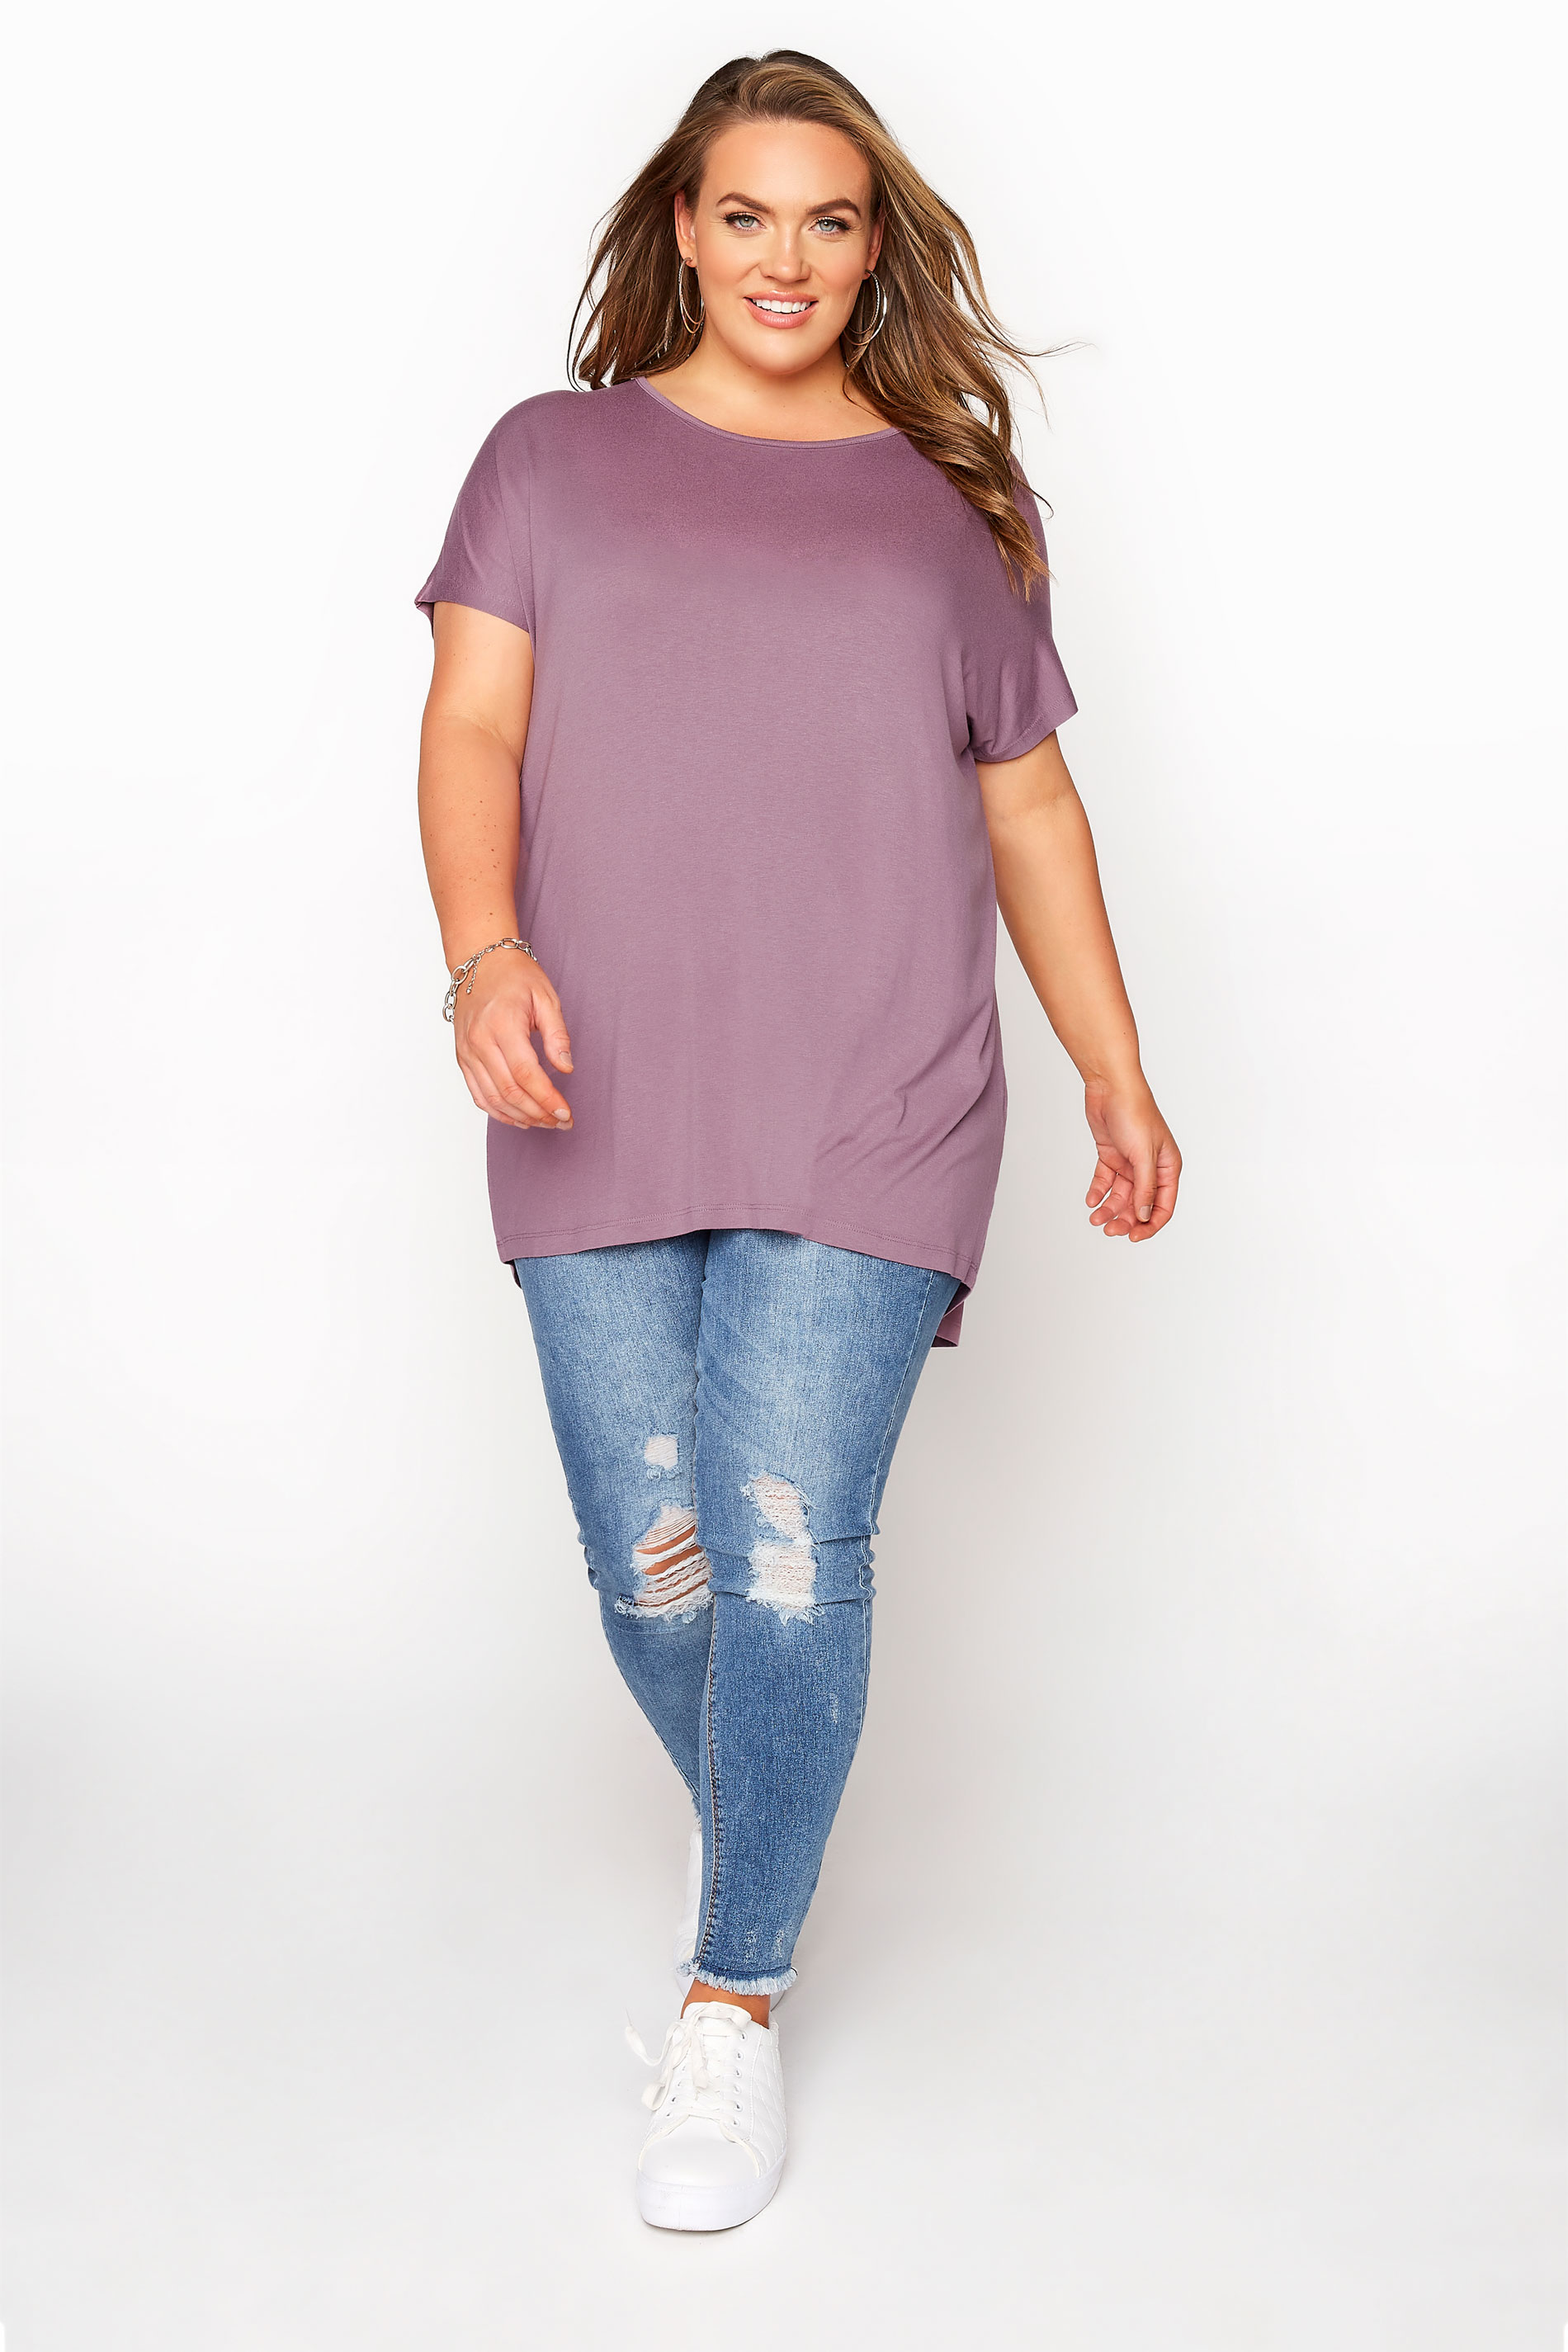 Grande taille  Tops Grande taille  T-Shirts | T-Shirt Mauve Ourlet Plongeant Manches Courtes - UB79297